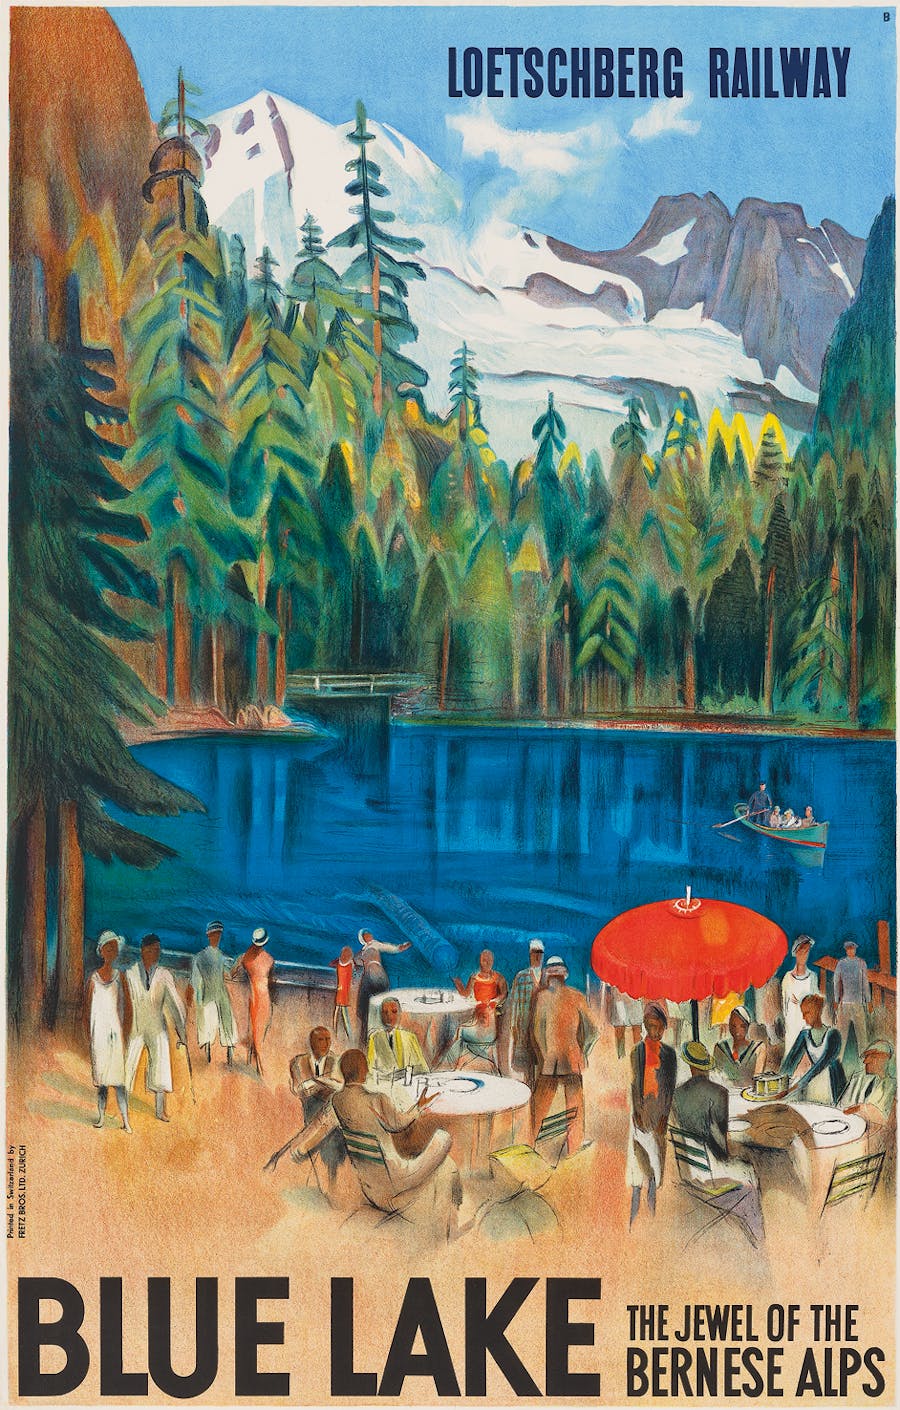 Otto Baumberger (1889-1961), ‘Blue Lake, The Jewel of the Bernese Alps’ Lithographic Poster, 1925. Photo © Lyon & Turnbull